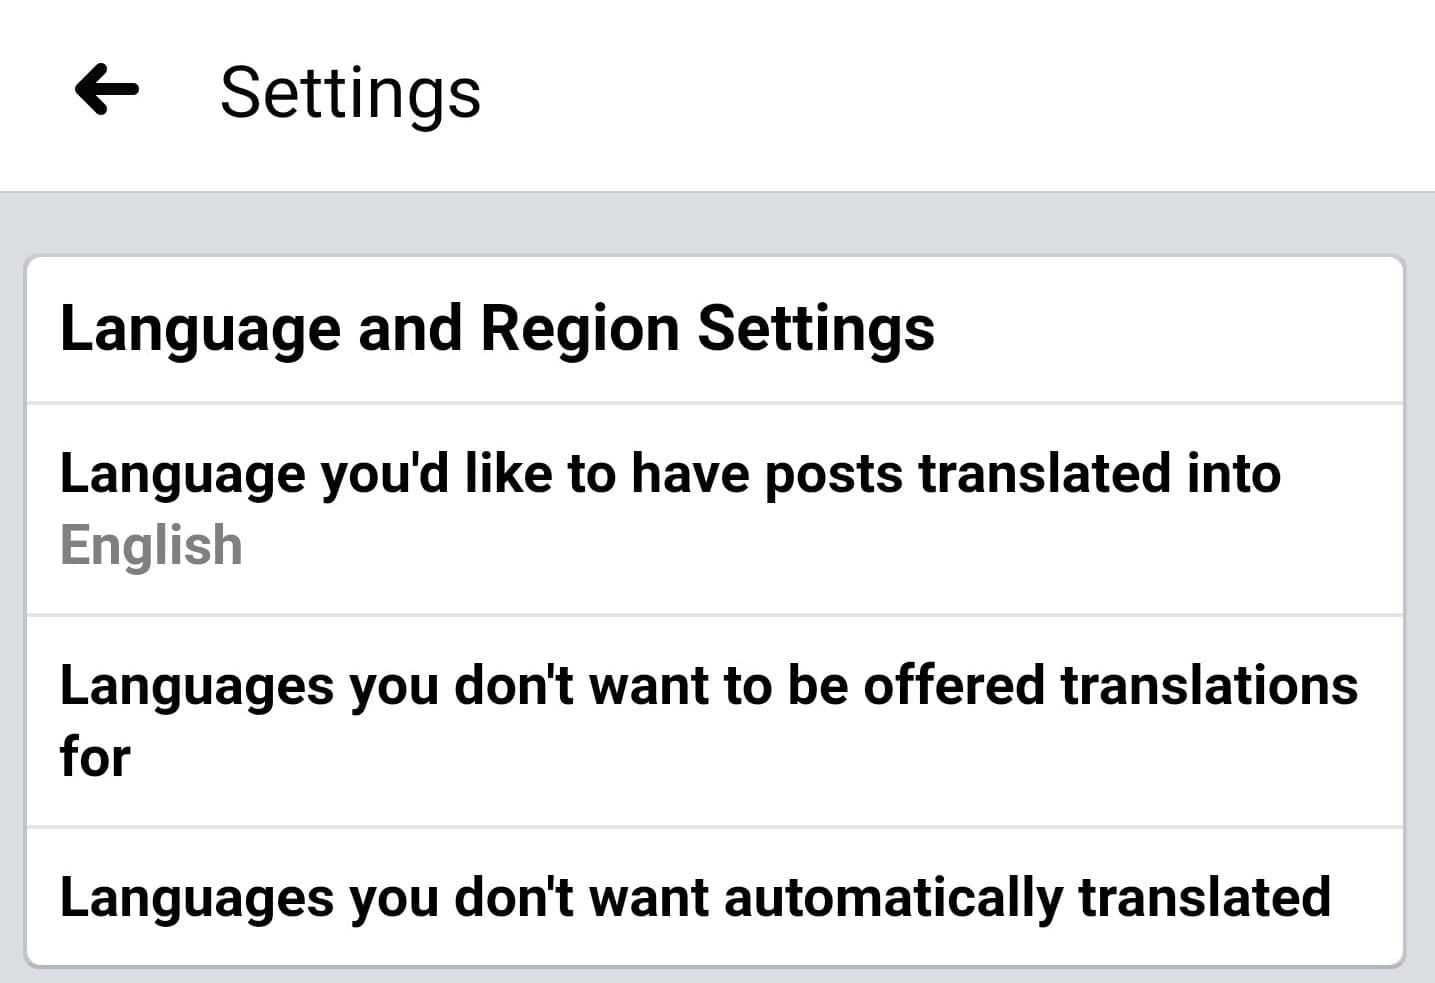 facebook languages you don't want to be offered translations for